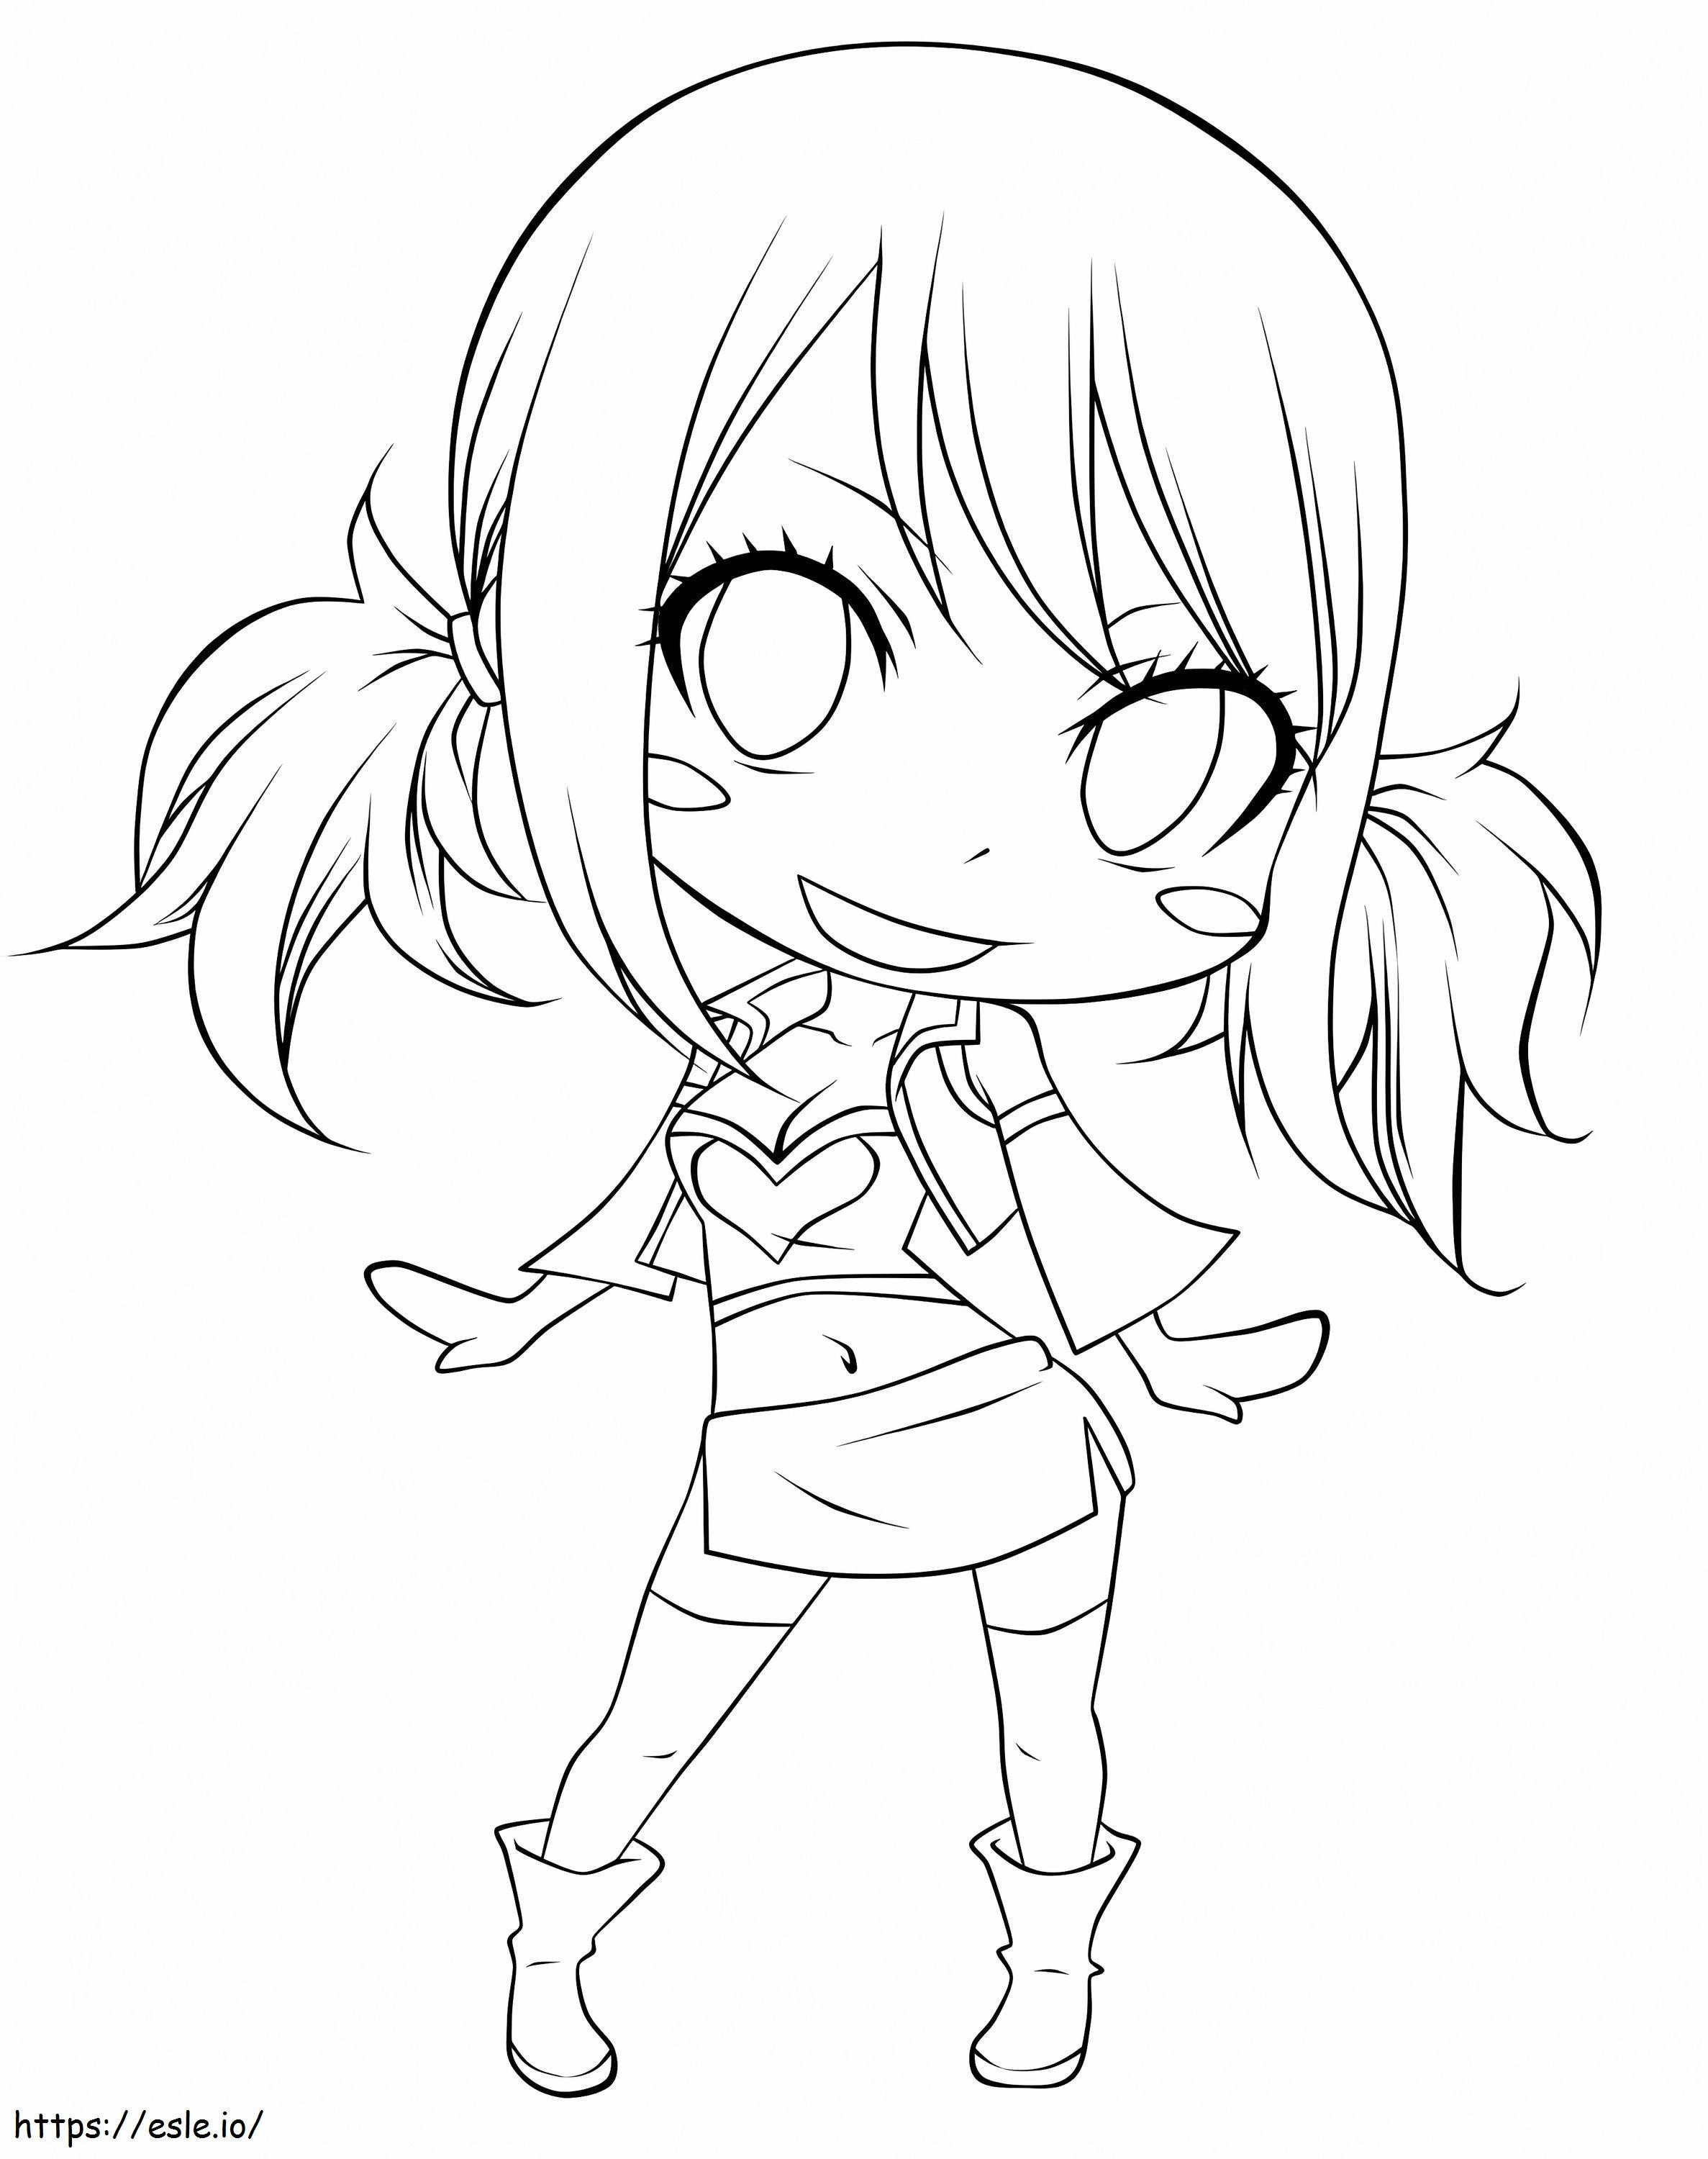 Chibi Lucy Heartfilia 3 coloring page